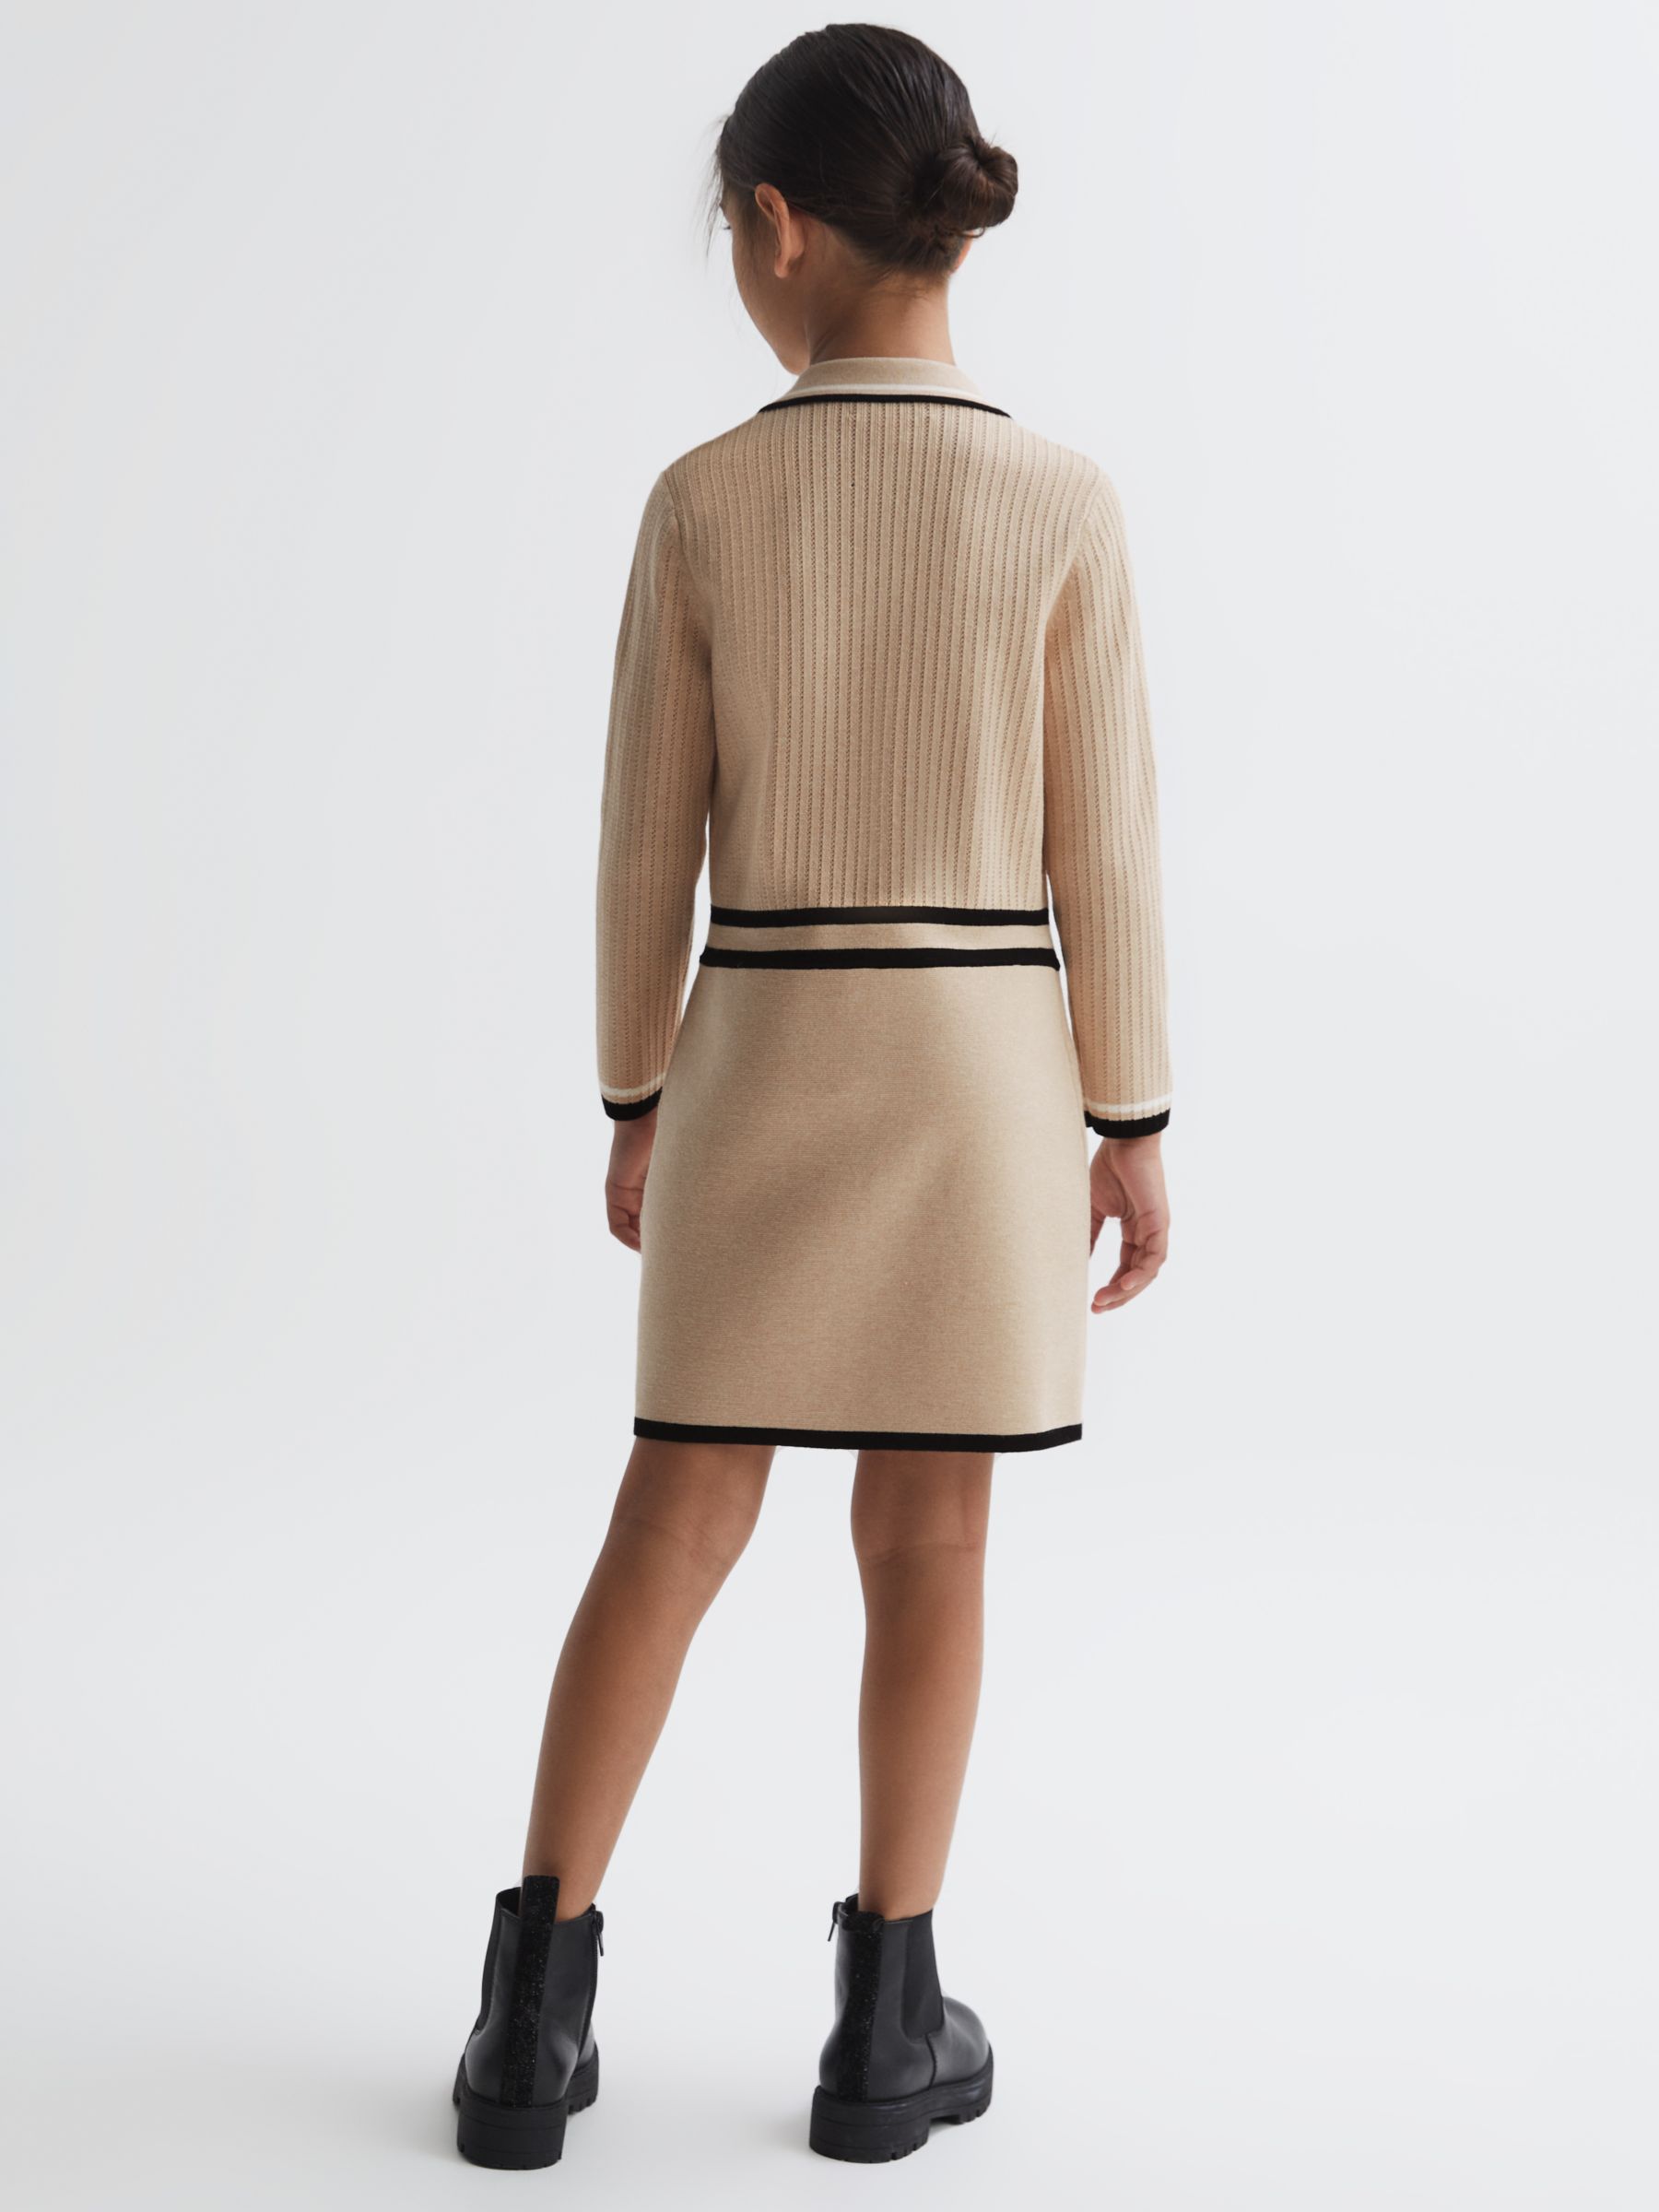 Reiss Kids' Ruby Knitted Polo Dress, Camel, 5-6 years